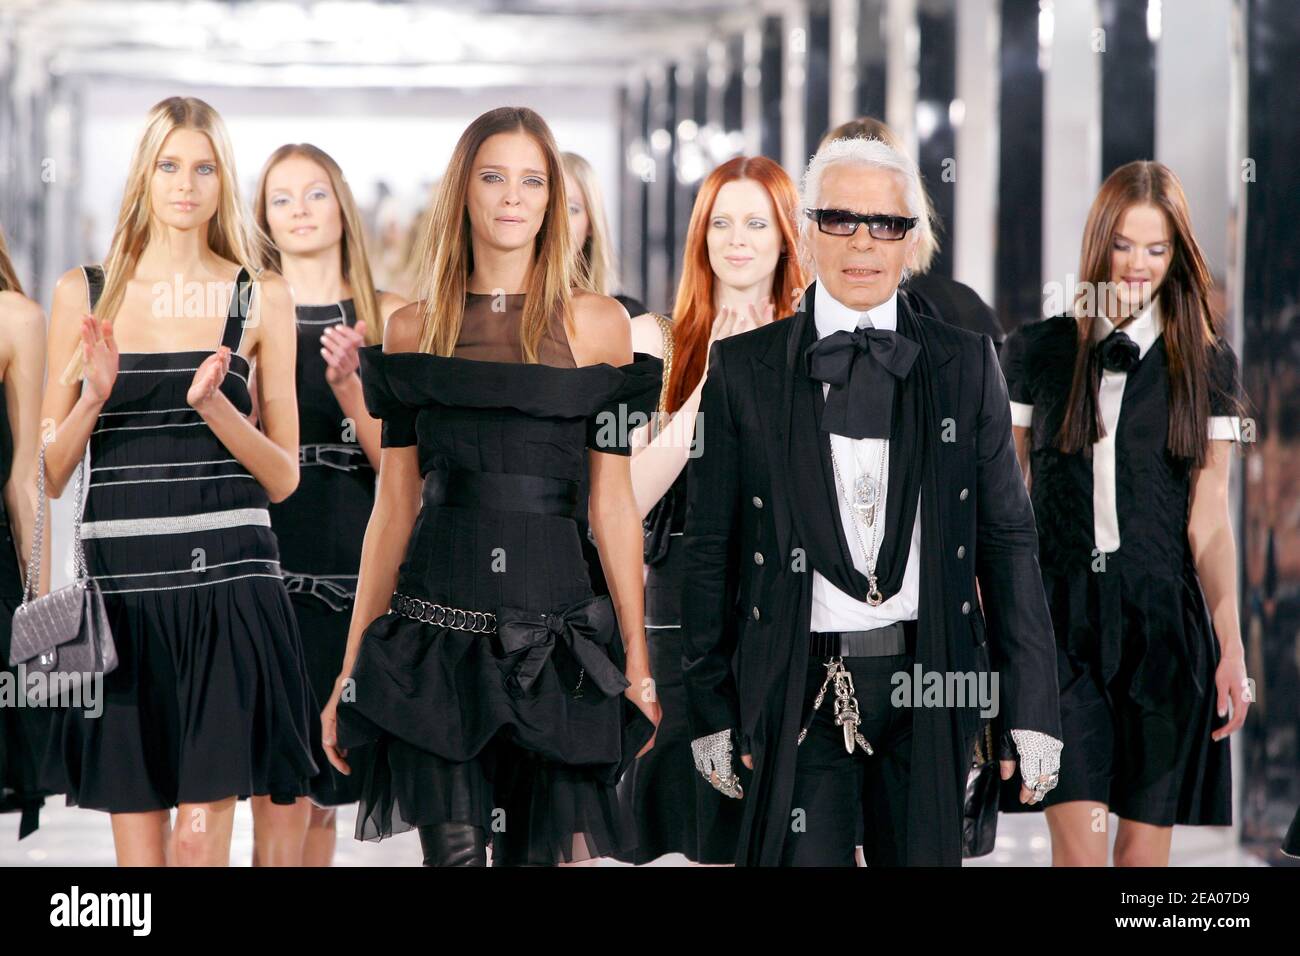 German fashion designer Karl Lagerfeld by models walks on the runway for  Chanel Fall-Winter 2005-2006 ready-to-wear collection presentation in  Paris, France, on March 4, 2005. Photo by Java/ABACA Stock Photo - Alamy